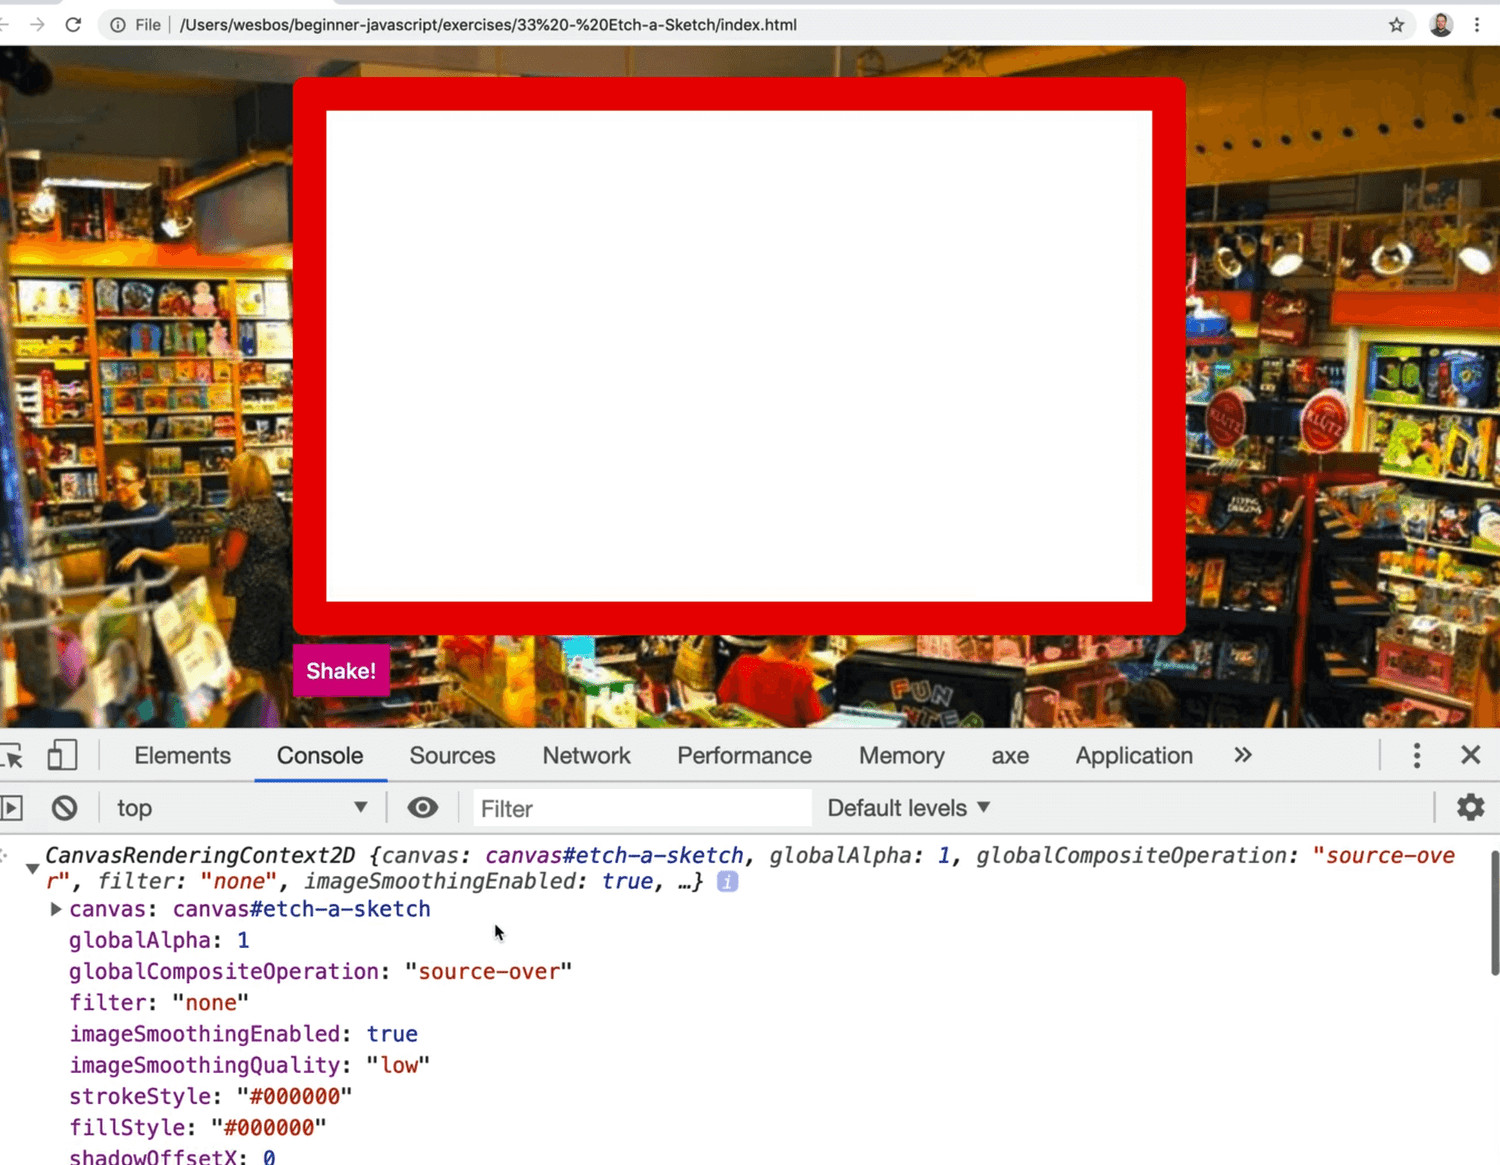 console showing CanvasRenderingContext2D object